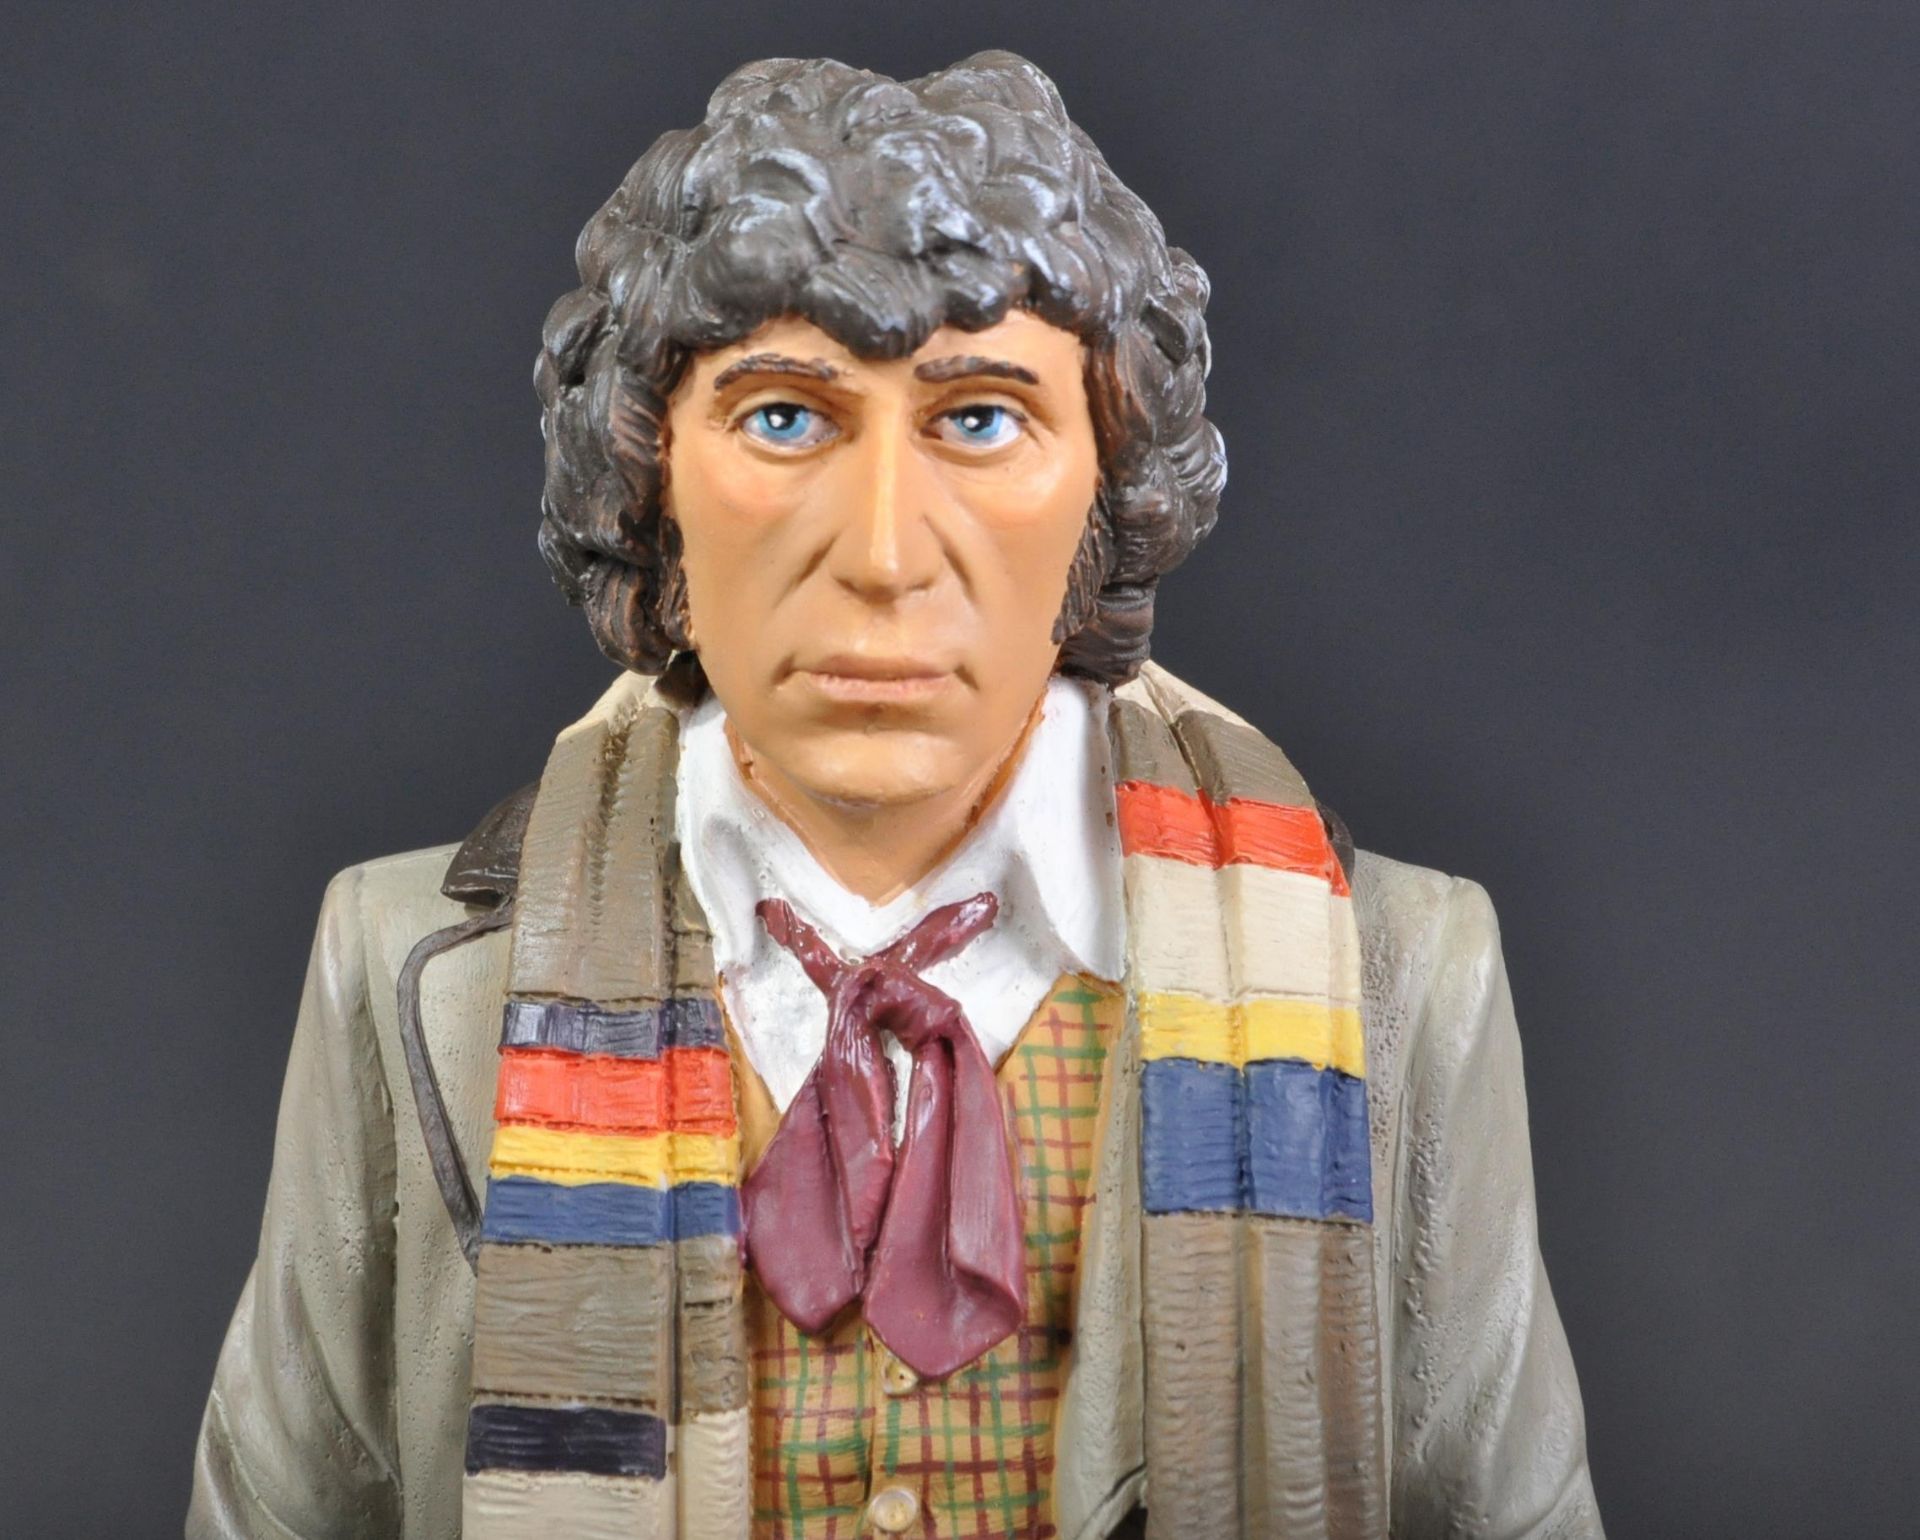 DOCTOR WHO - LARGE SCALE RESIN STATUE OF FOURTH DOCTOR TOM BAKER - Image 2 of 7